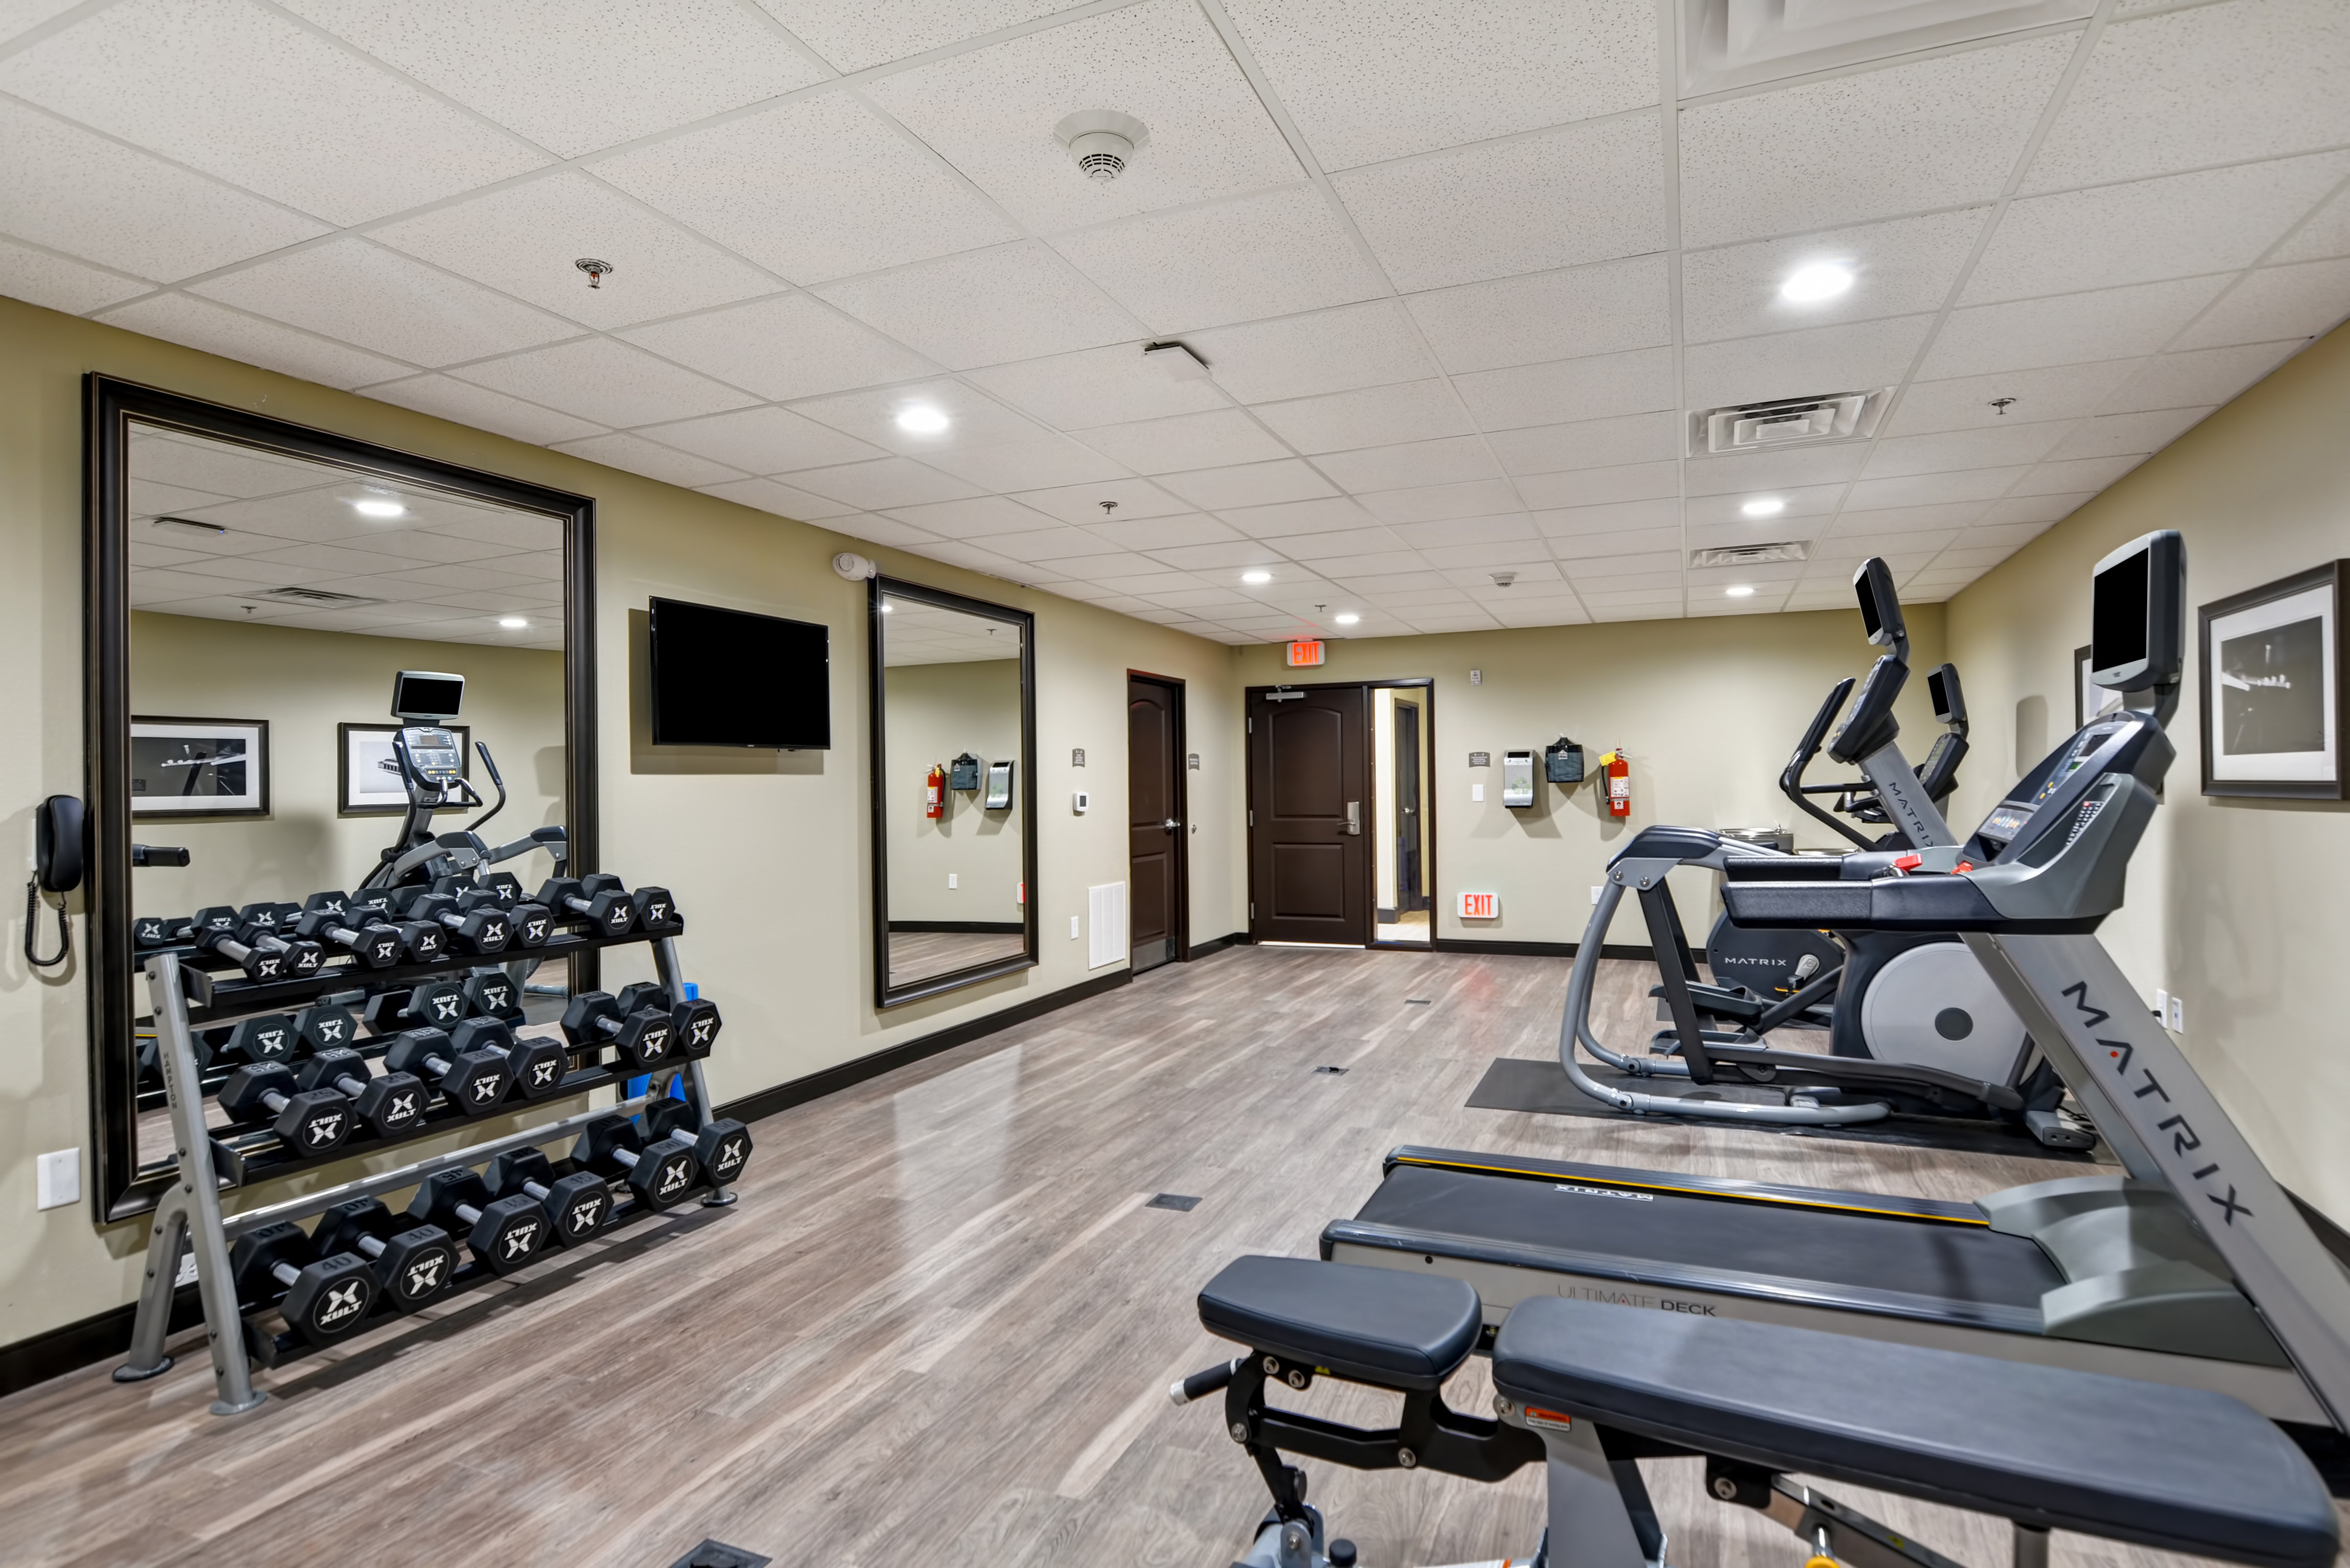 Enjoy our fully equipped Fitness Center.